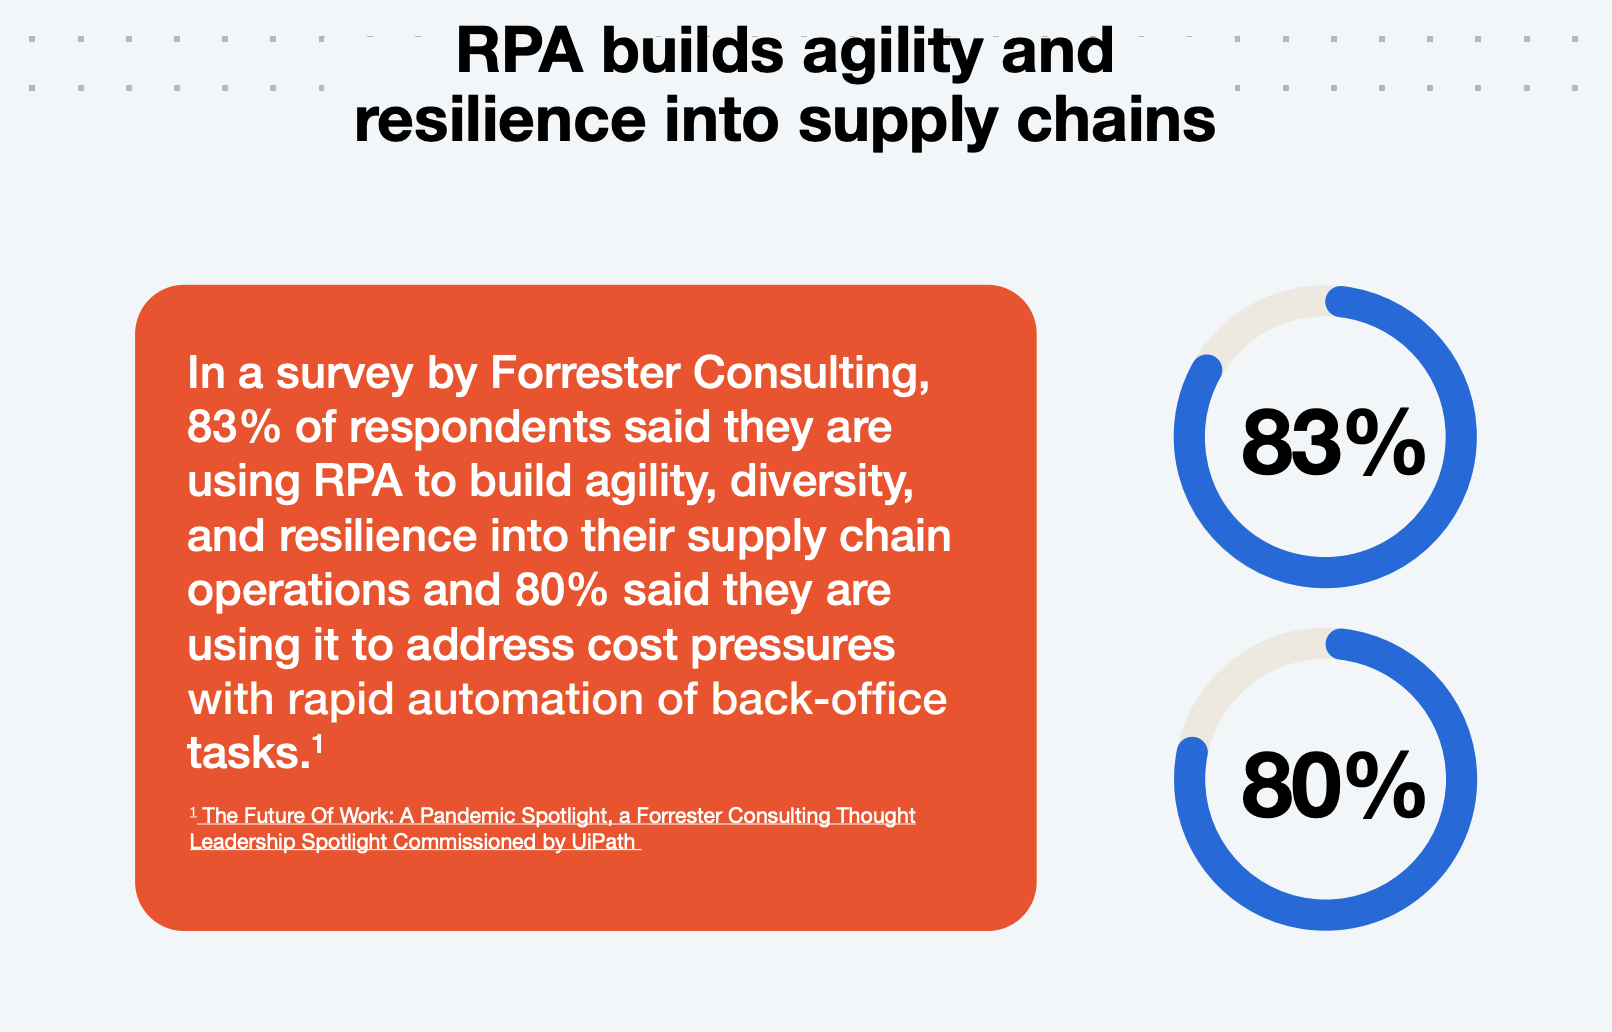 rpa builds agility into supply chains